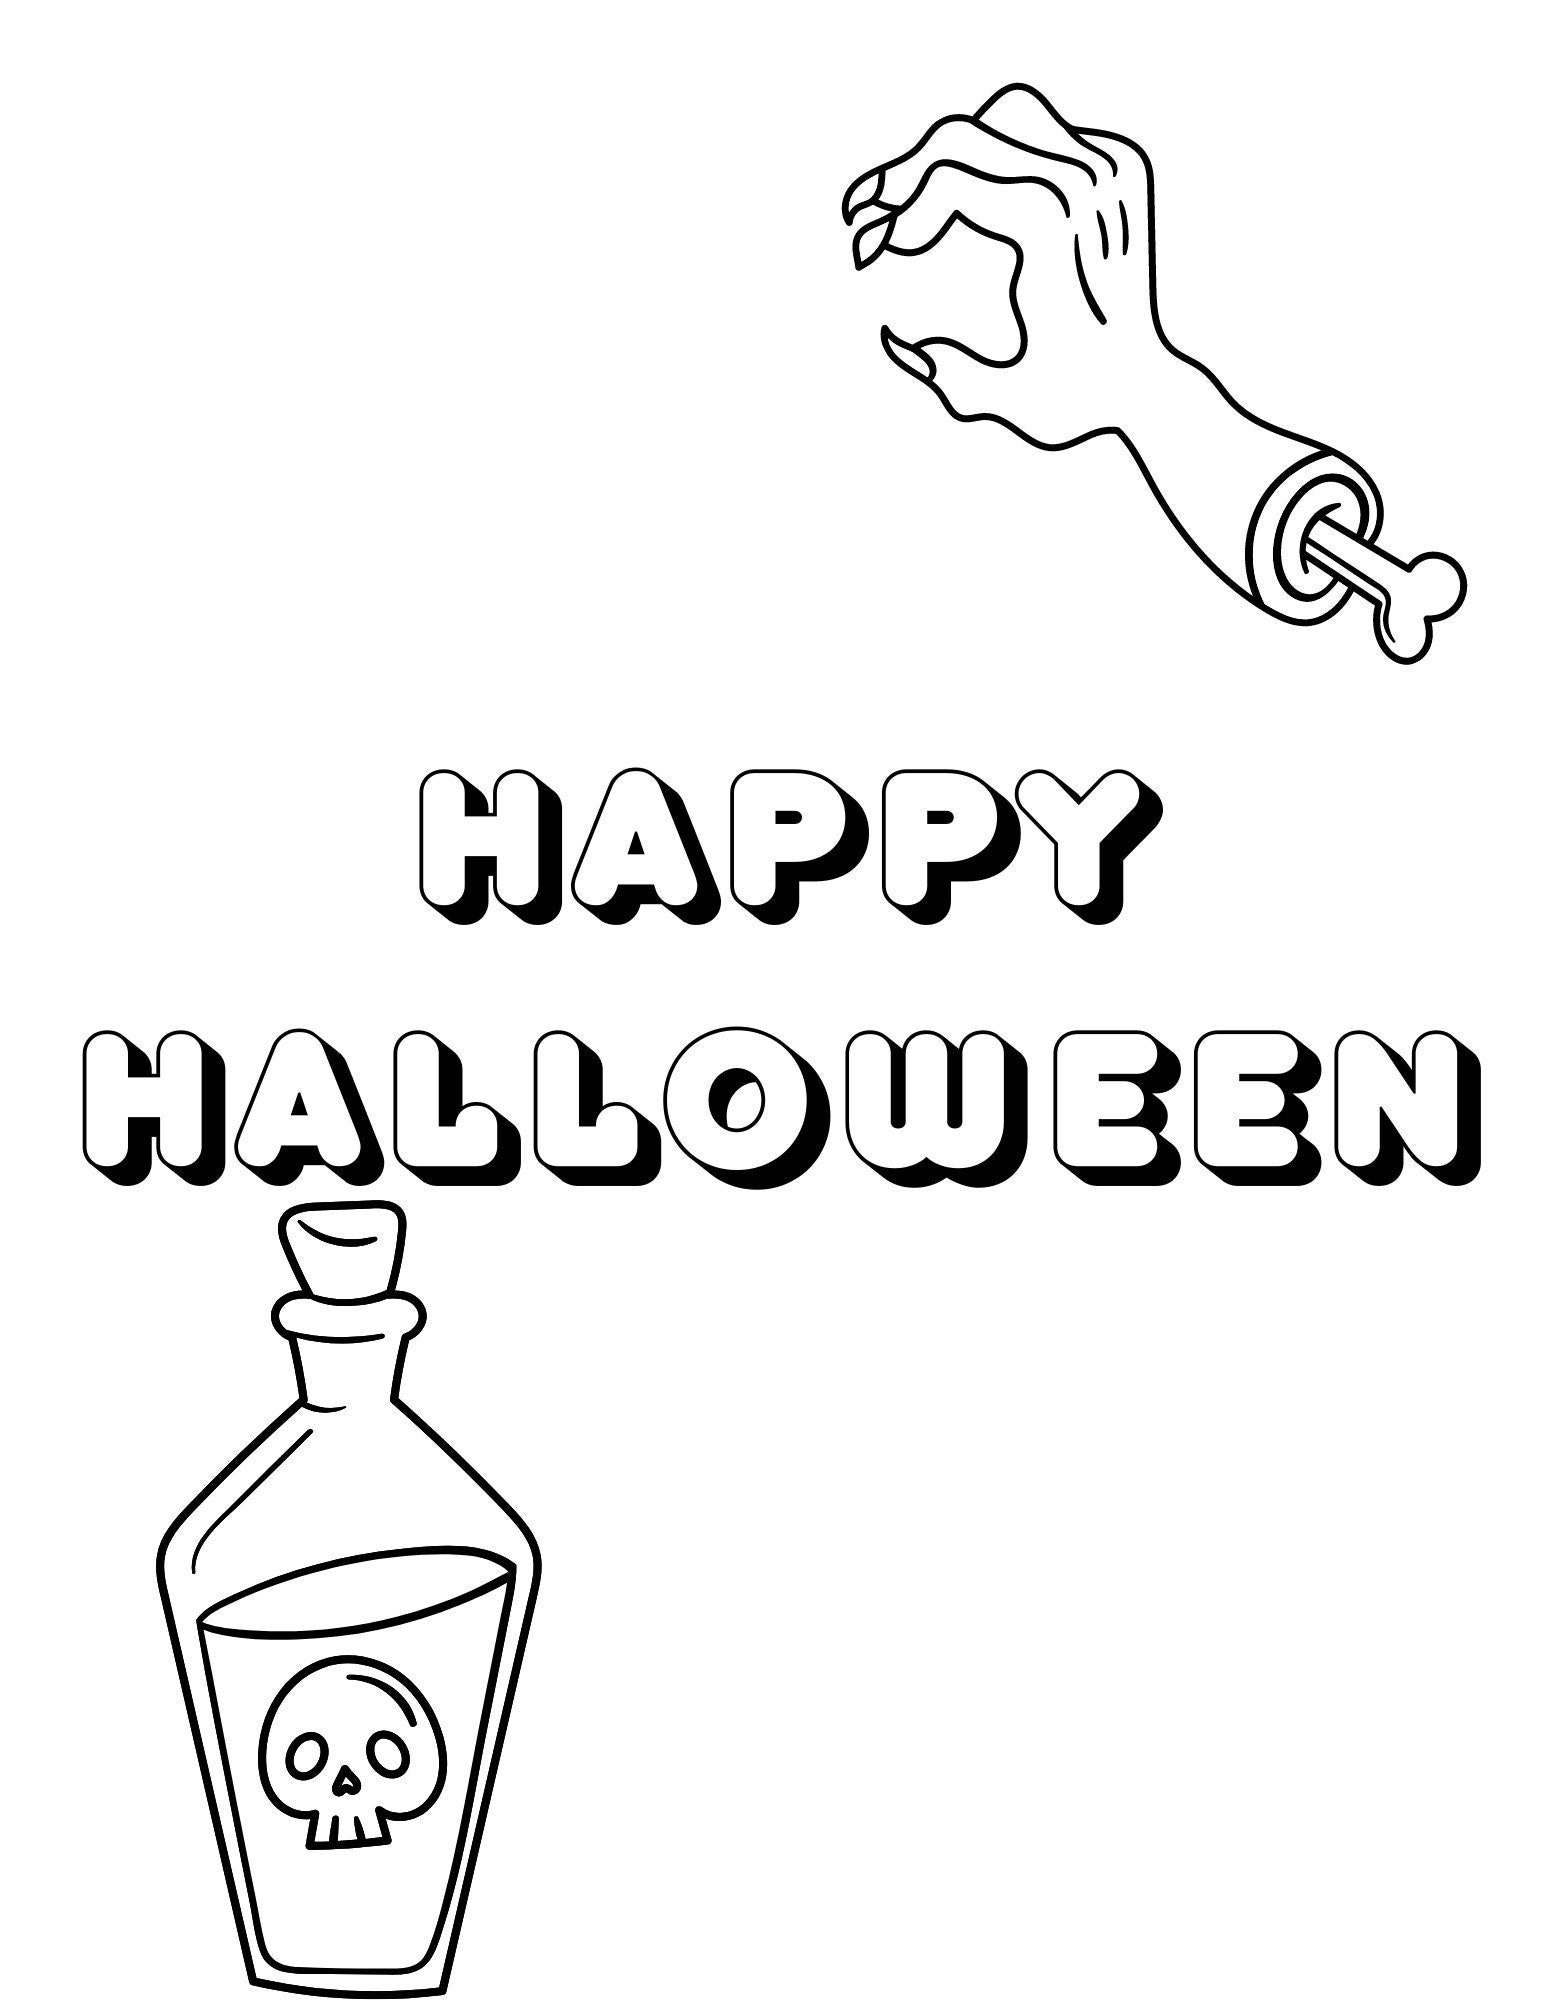 60+ FREE Halloween Coloring Pages for Adults & Kids - Happiness is